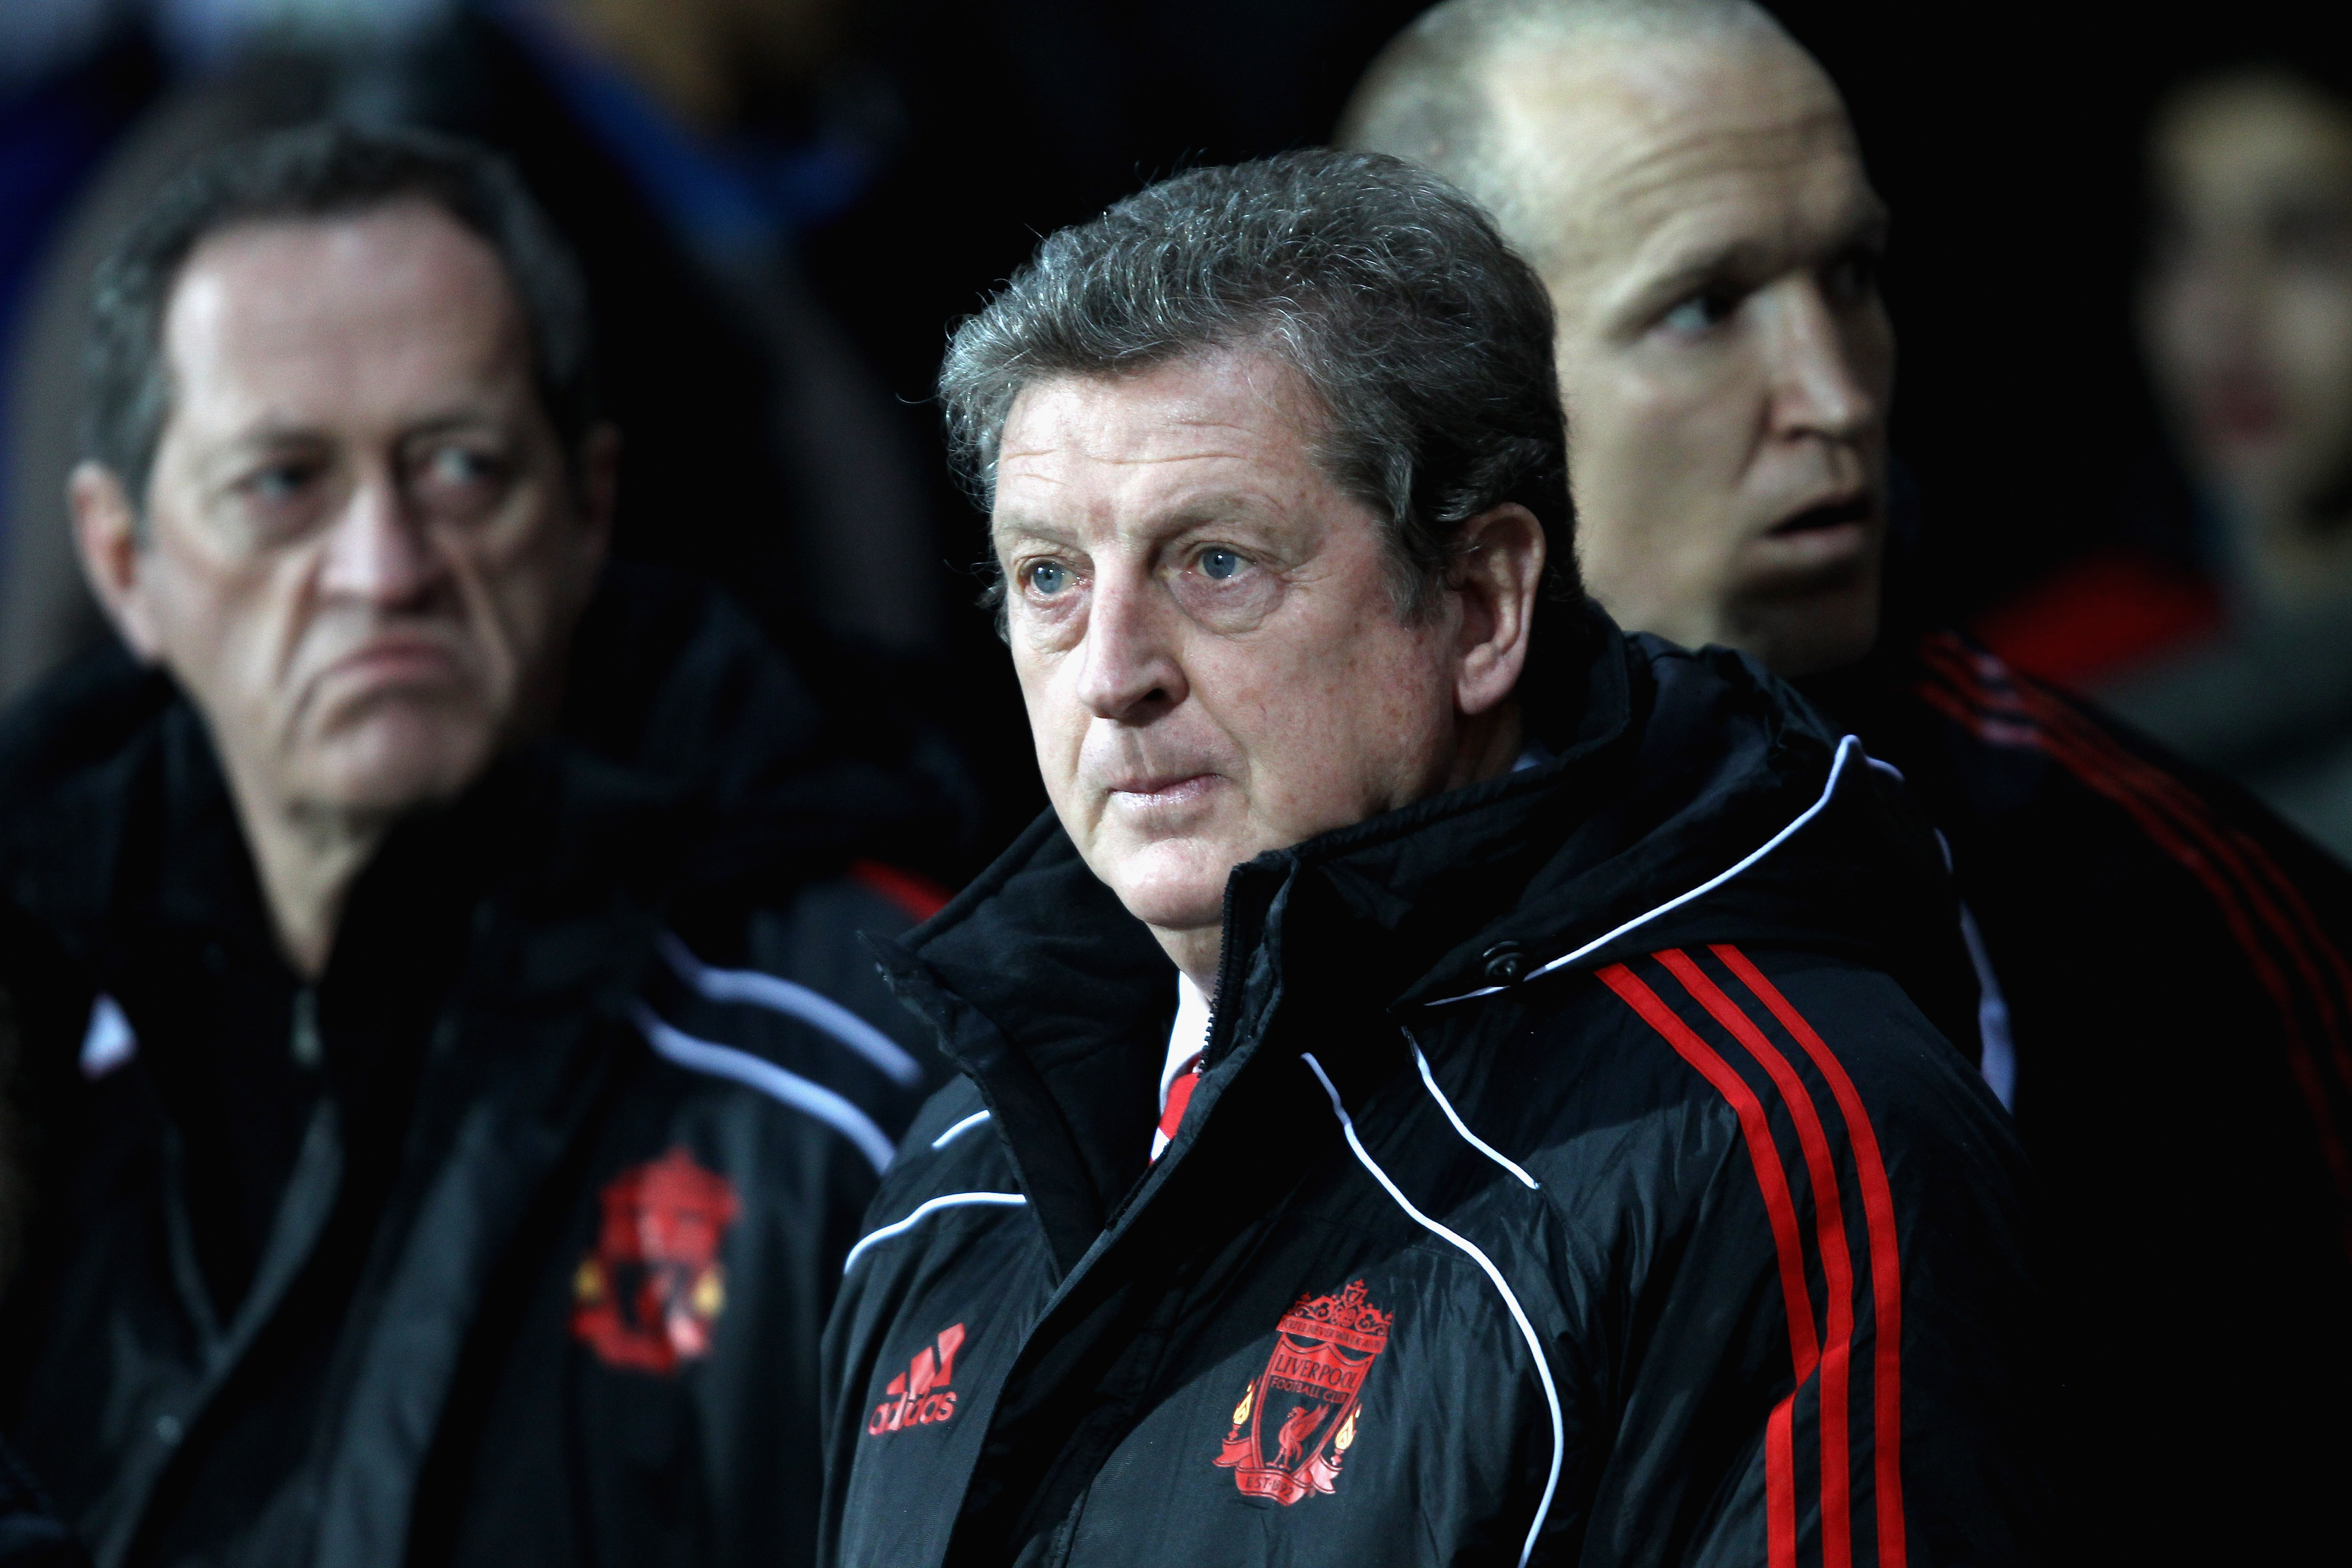 BLACKBURN, ENGLAND - JANUARY 05: Liverpool manager Roy Hodgson shows his dejection during the Barclays Premier League match between Blackburn Rovers and Liverpool at Ewood park on January 5, 2011 in Blackburn, England. (Photo by Clive Brunskill/Getty Images)